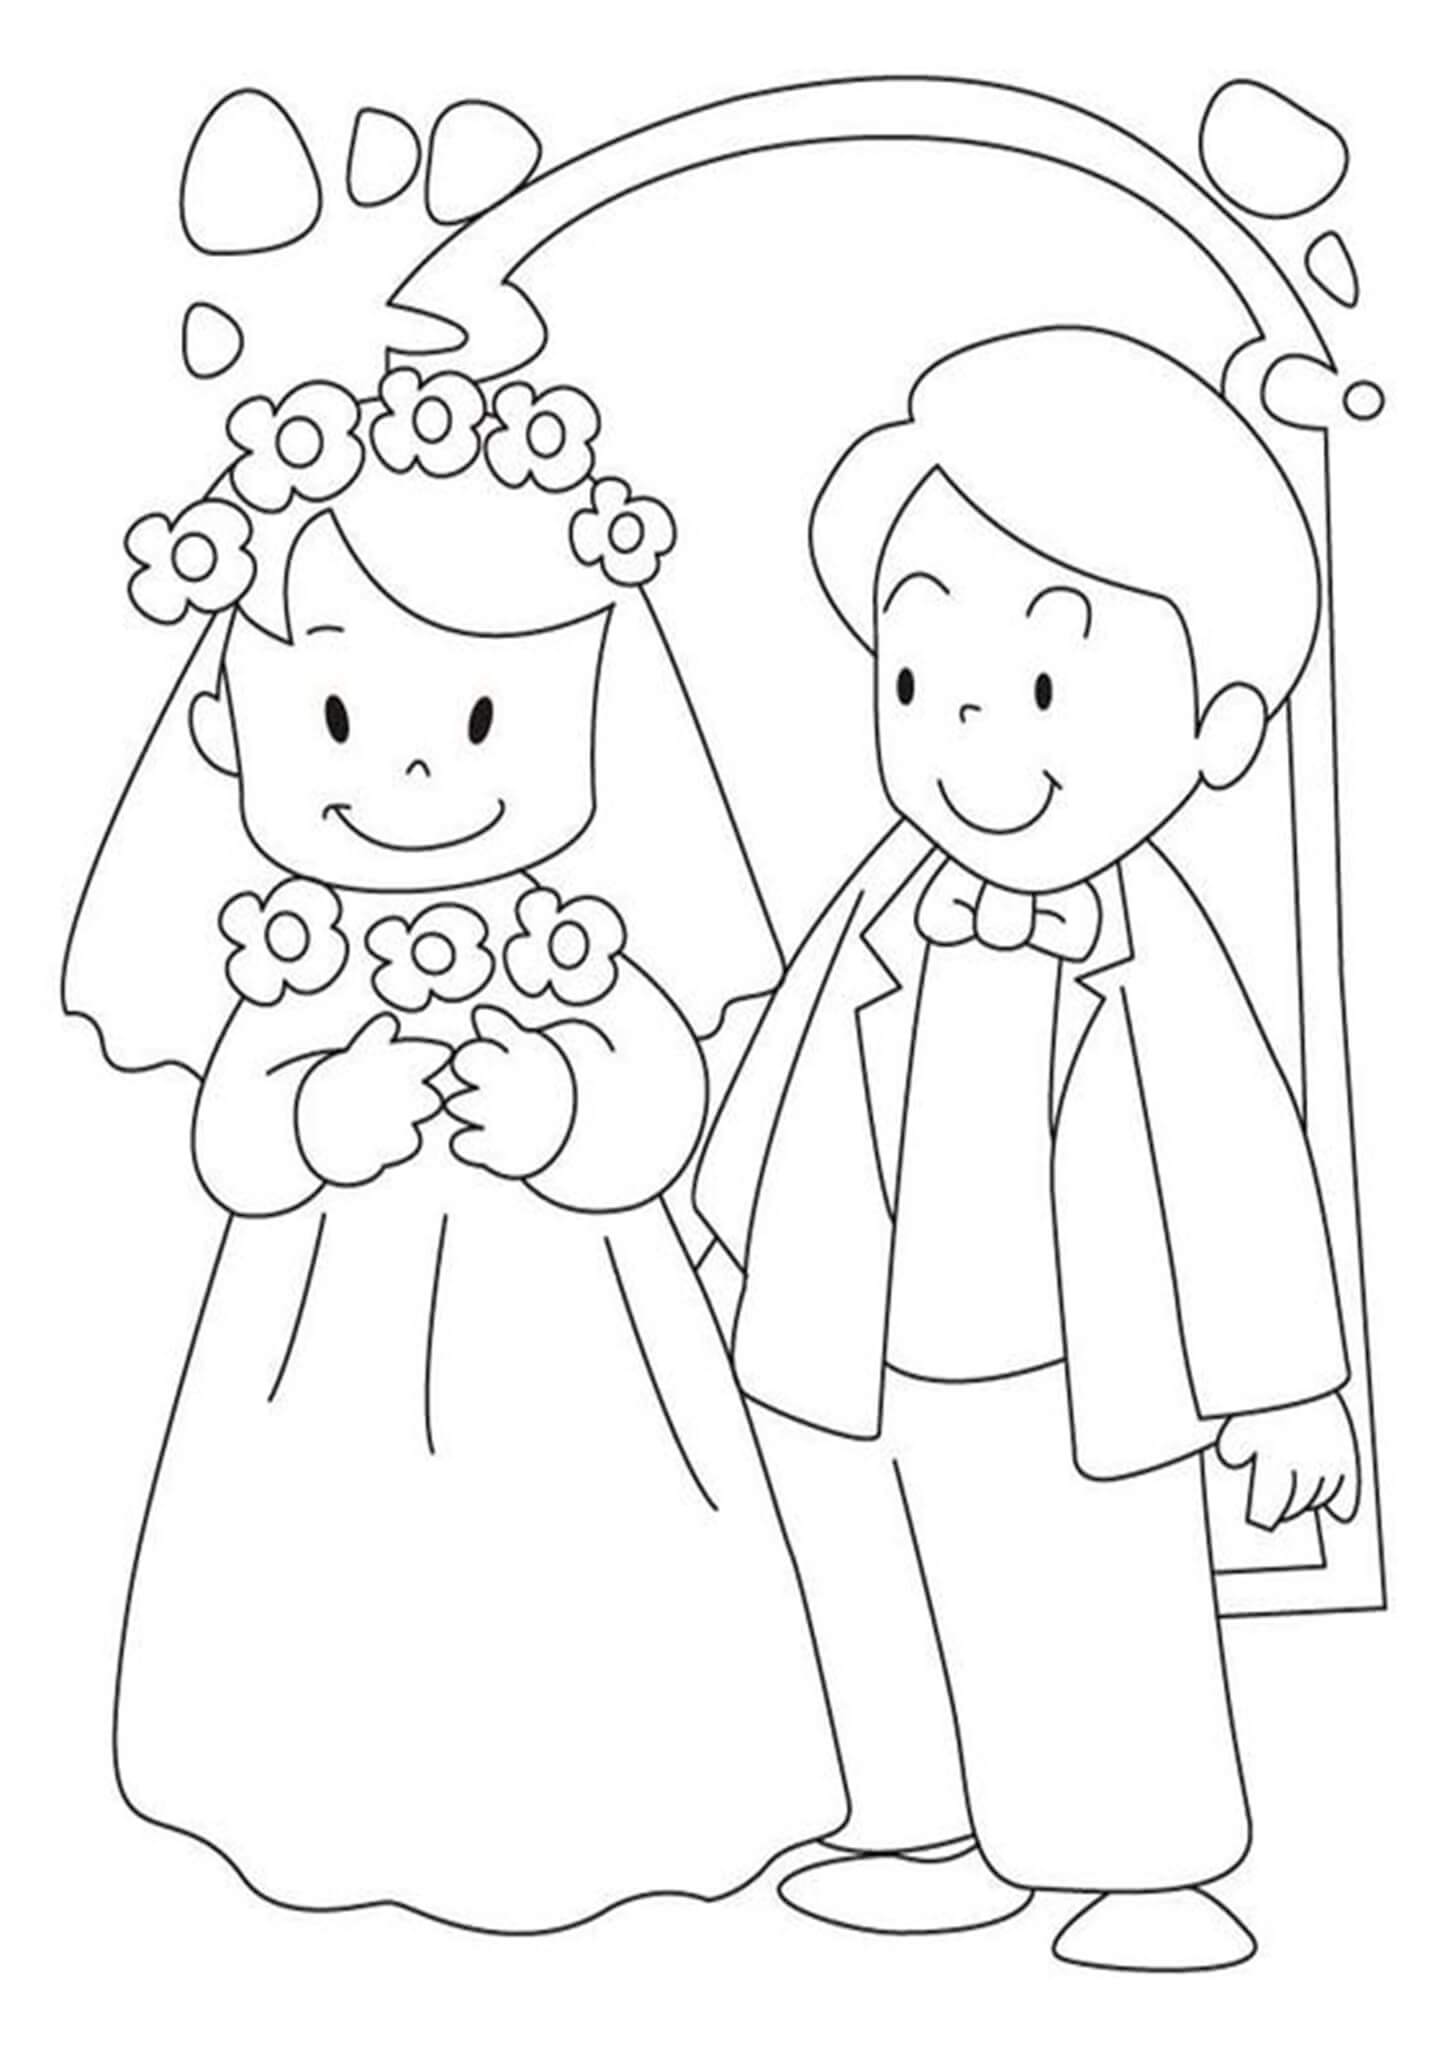 wedding-coloring-pages-free-wedding-coloring-pages-6-coloring-kids